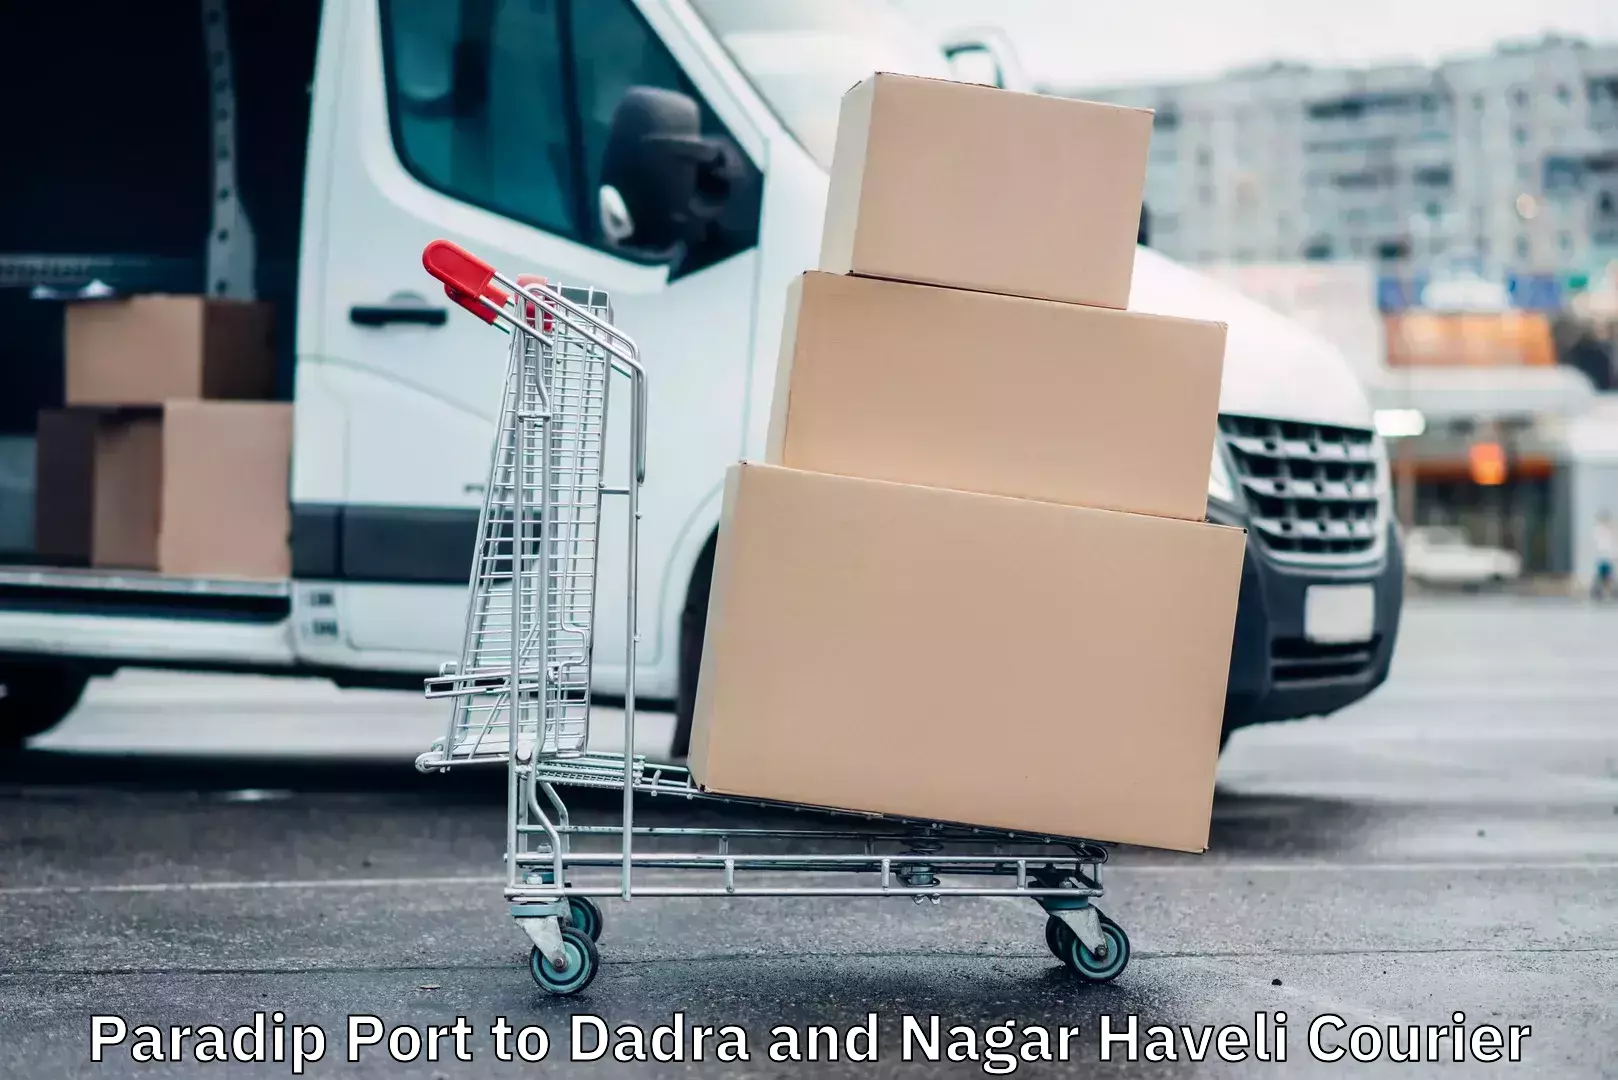 User-friendly delivery service Paradip Port to Dadra and Nagar Haveli